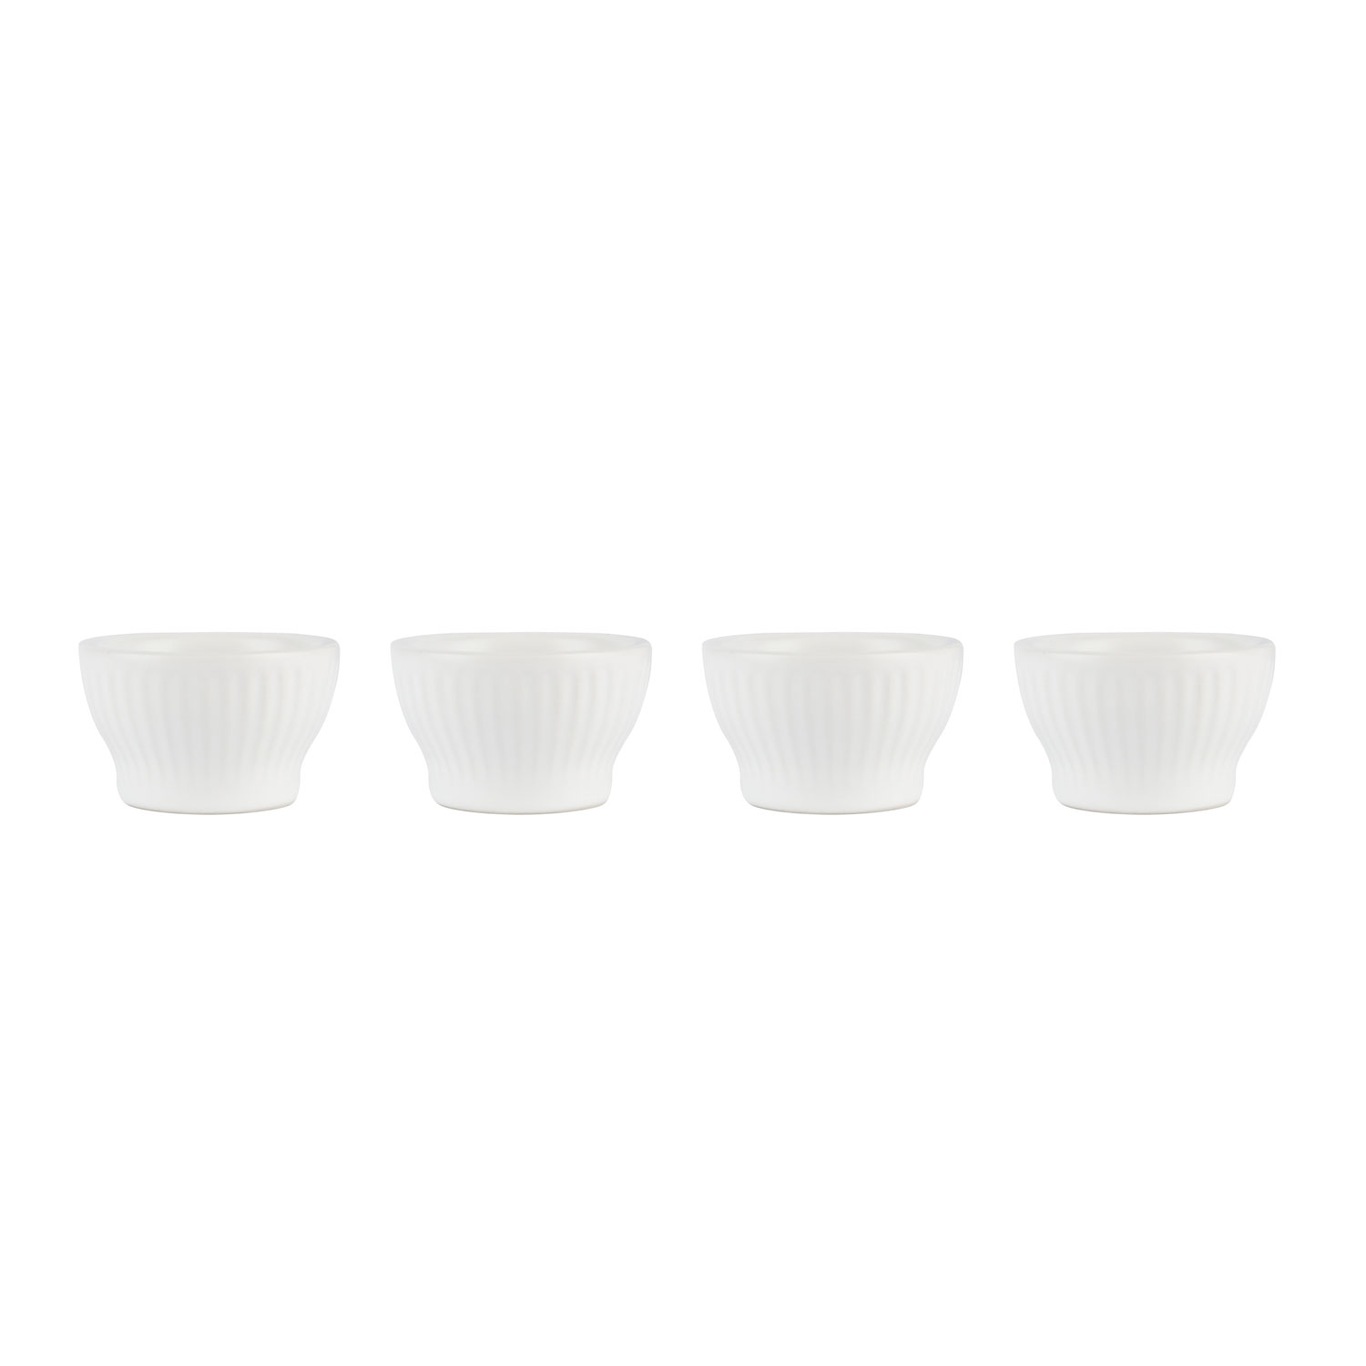 Groovy Egg Cups 4-pack, White